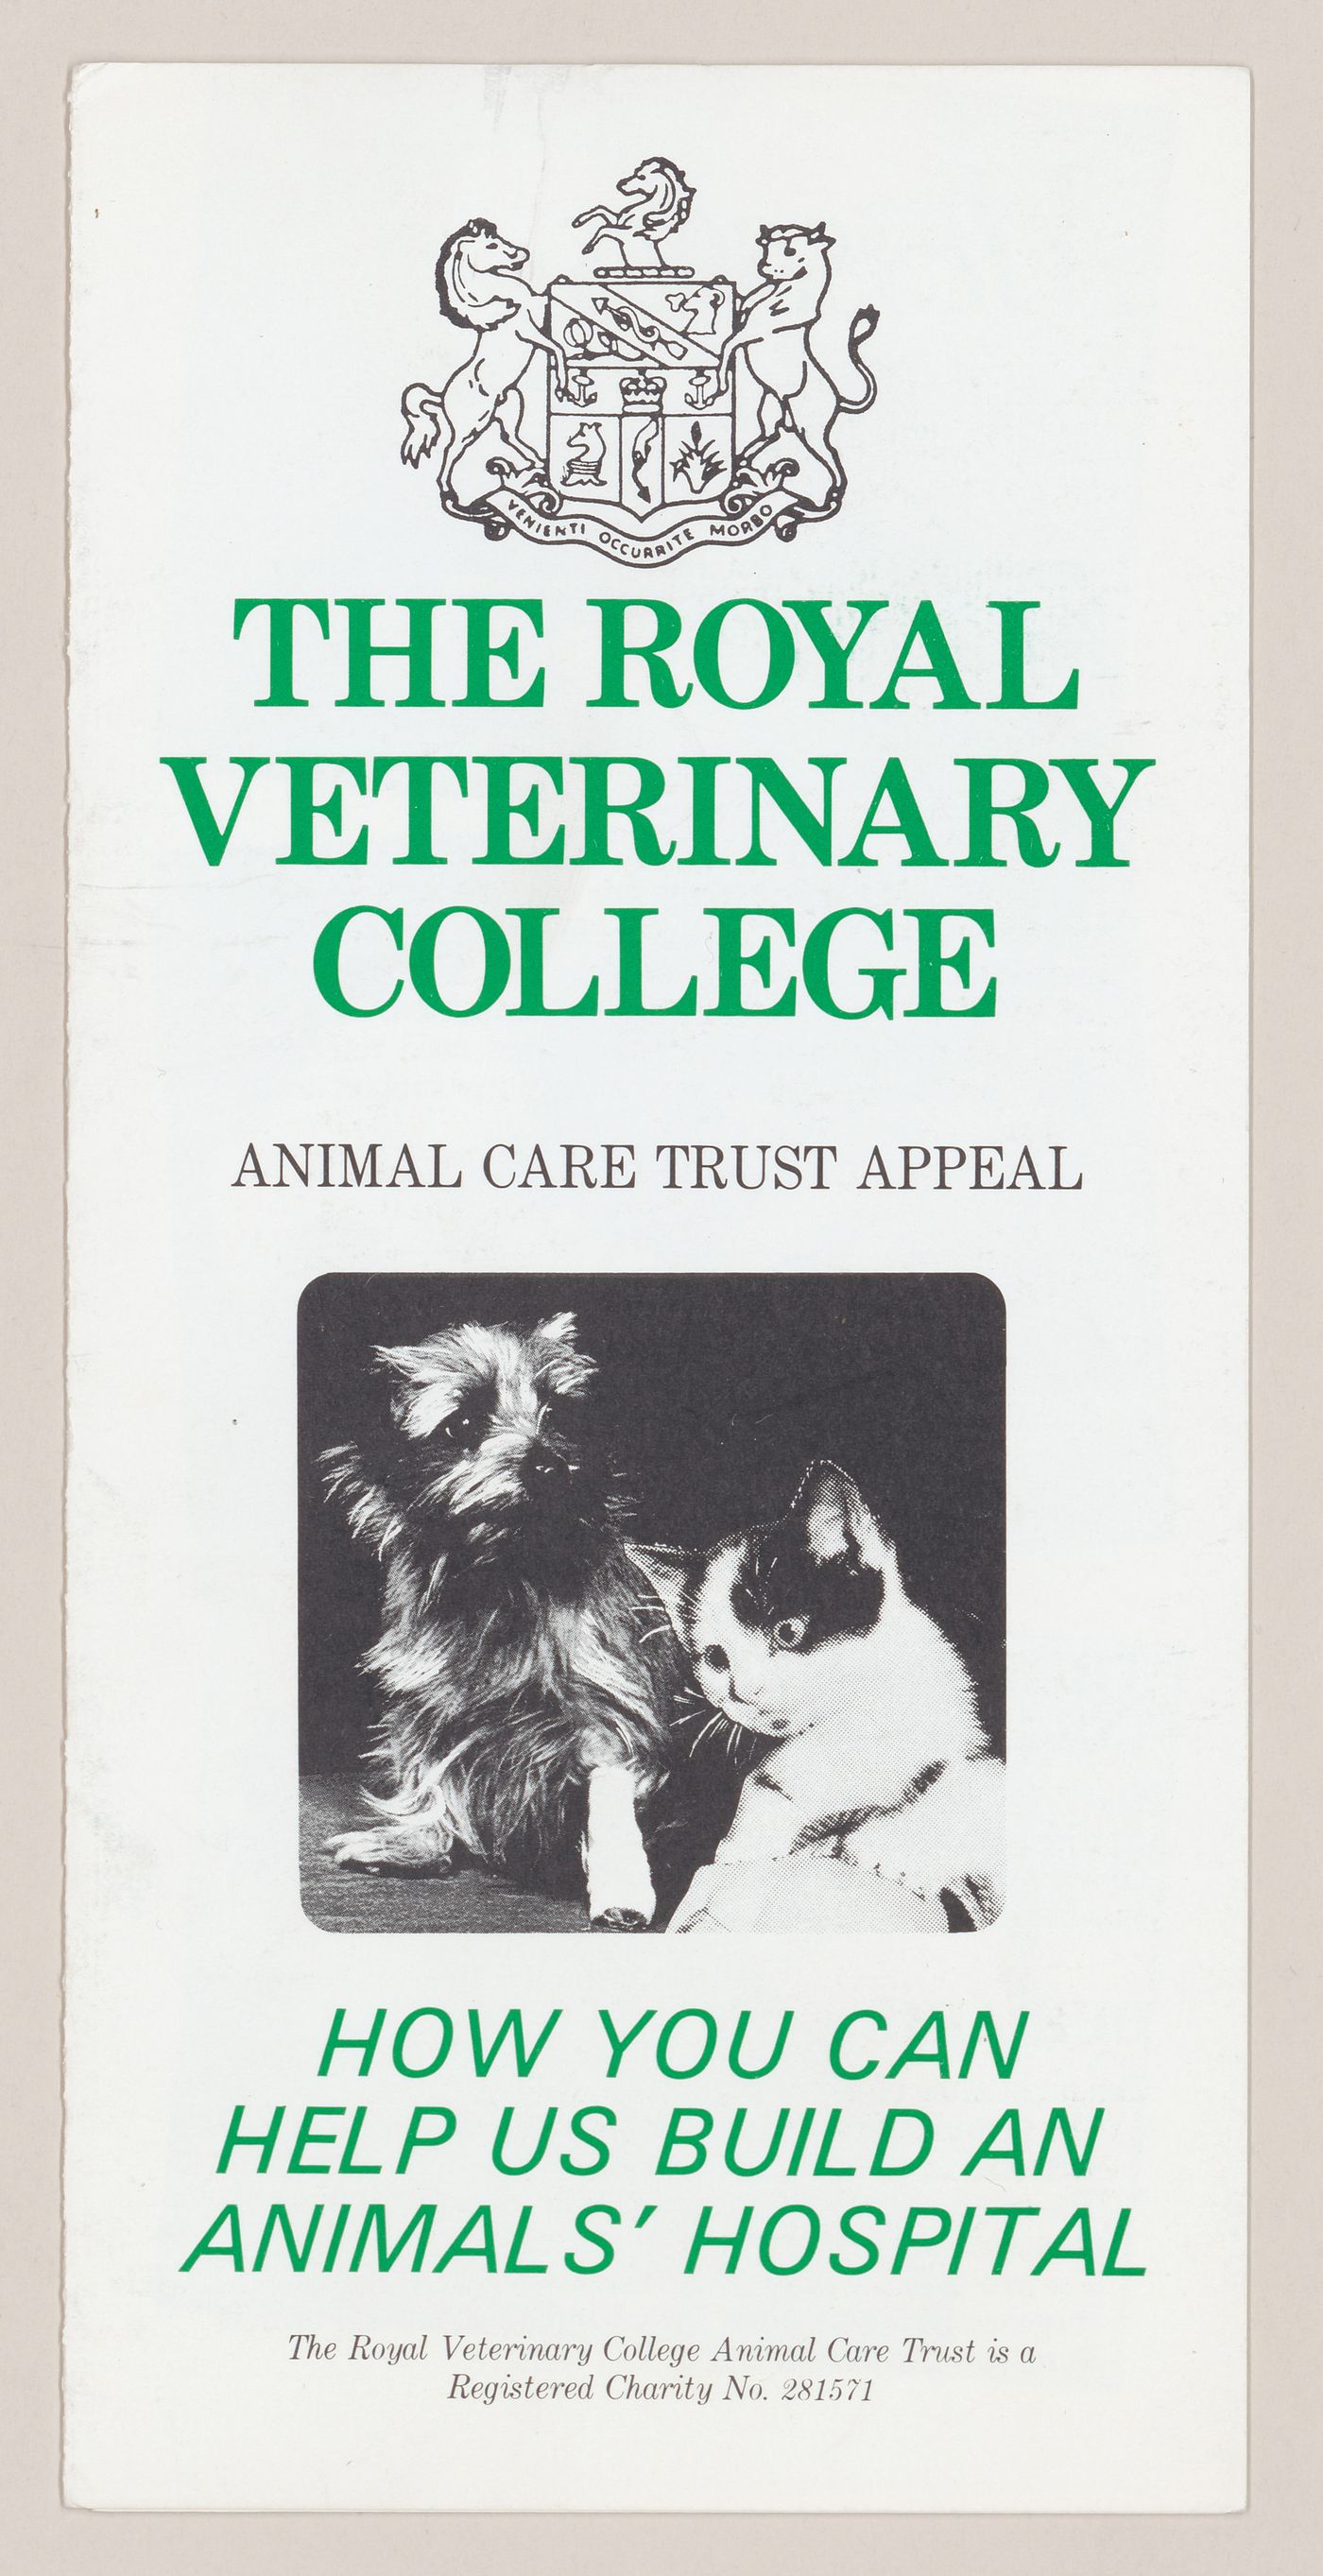 Fundraising brochure "How you can help us build an animals' hospital" from The Royal veterinary college